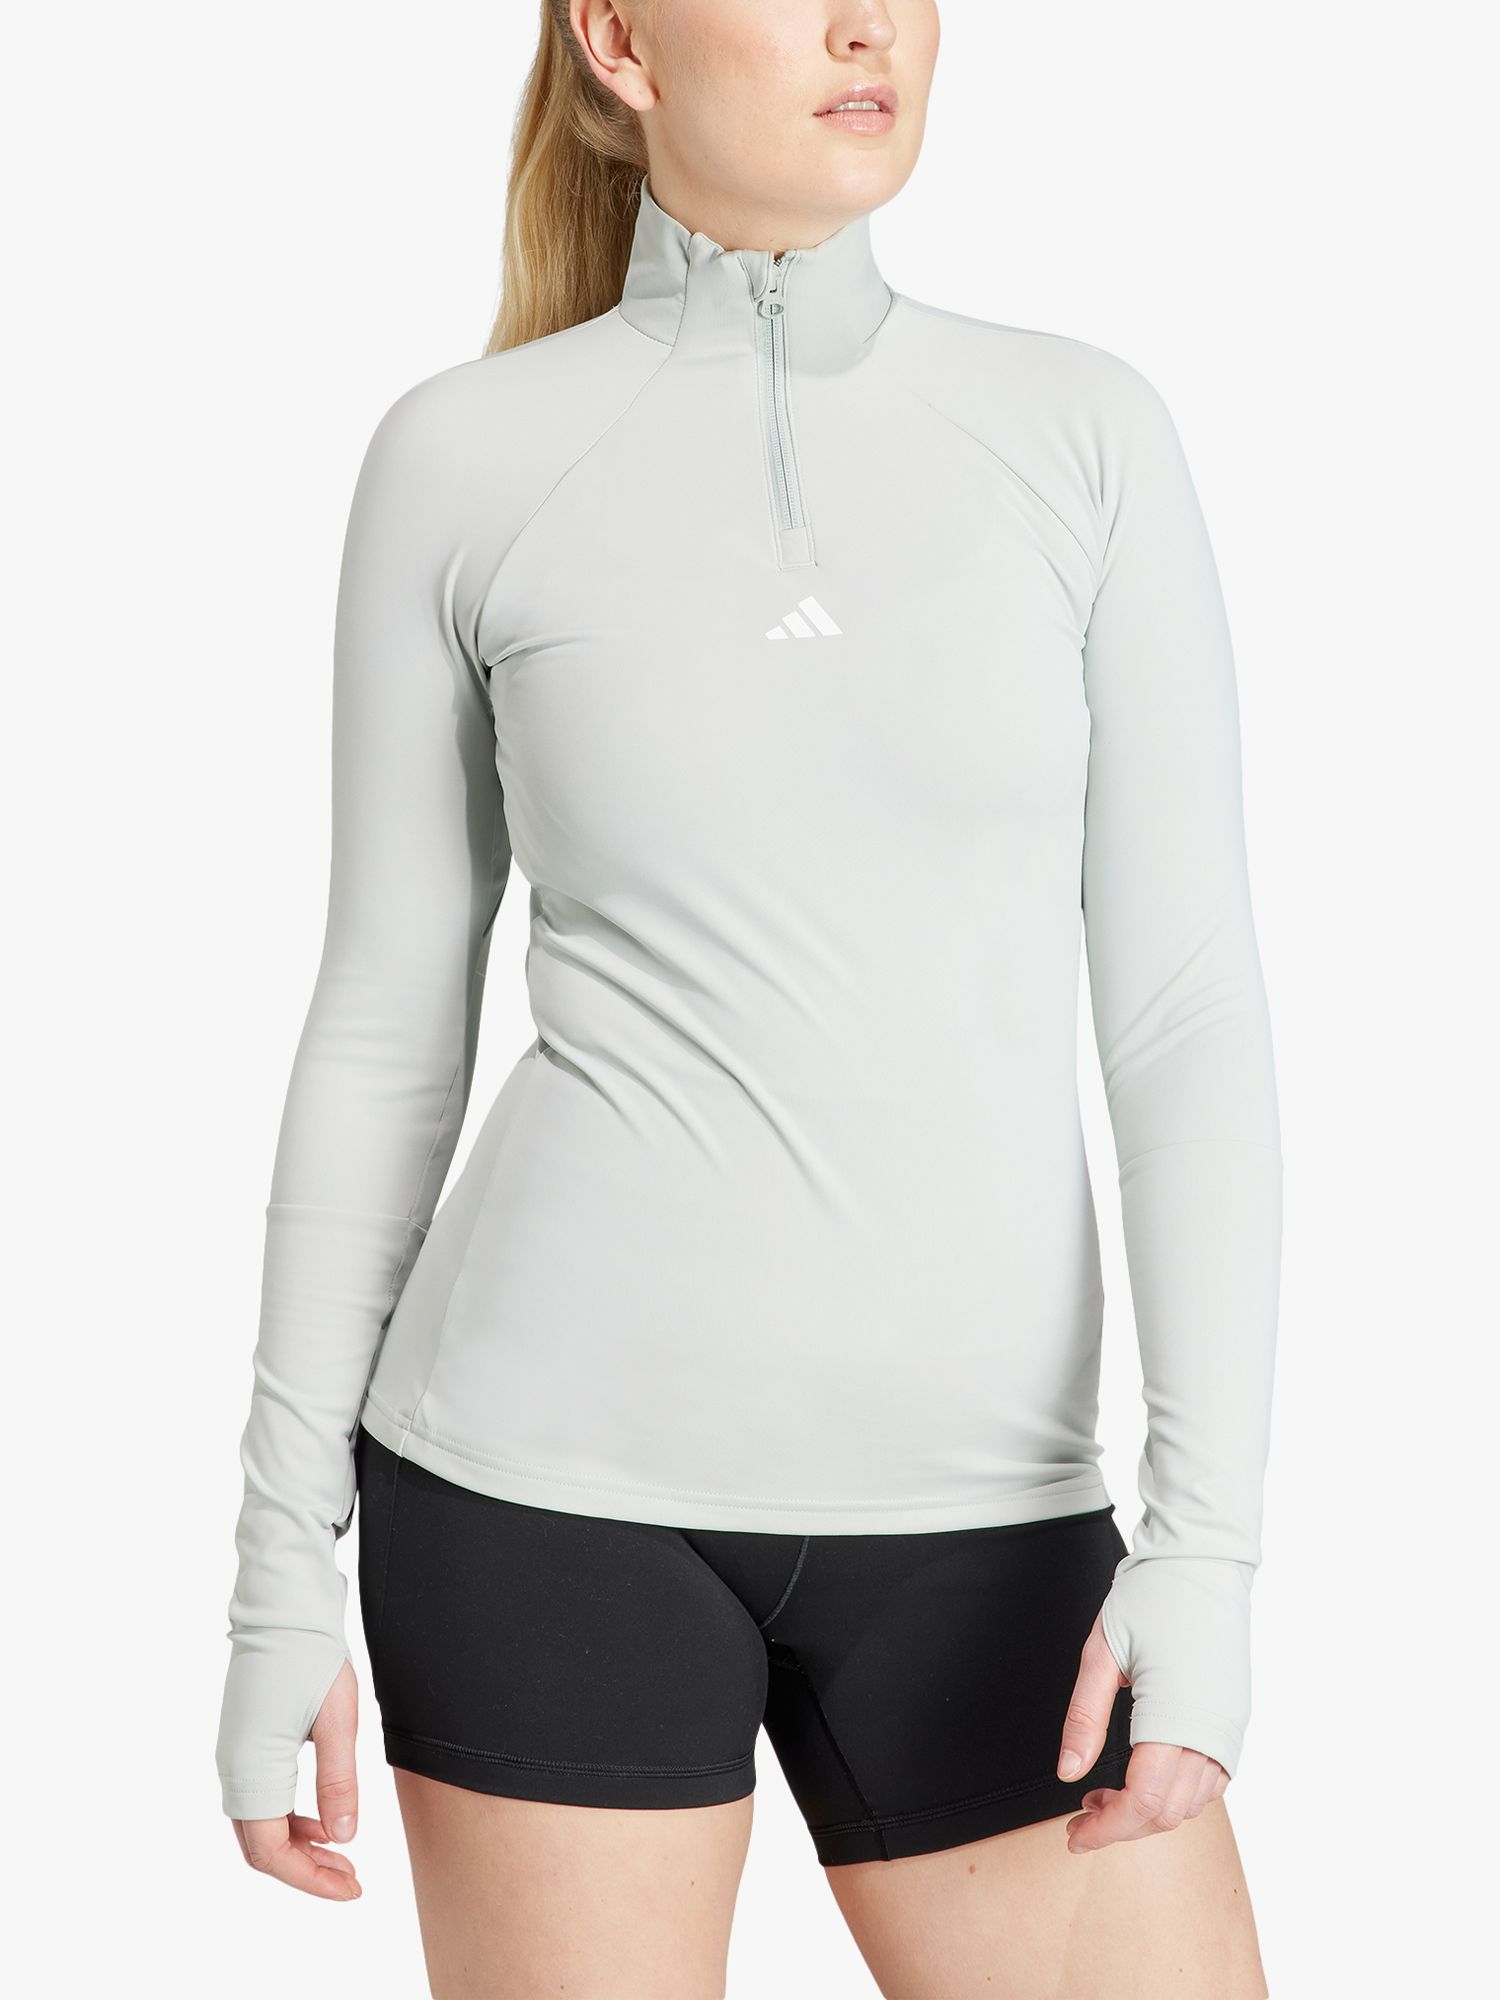 Women Petite's Zipper Long Sleeve Compression Shirts with  Thumbhole,Quick-Drying Yoga Athletic Running T Shirt Pullover for Hiking  Running Workout